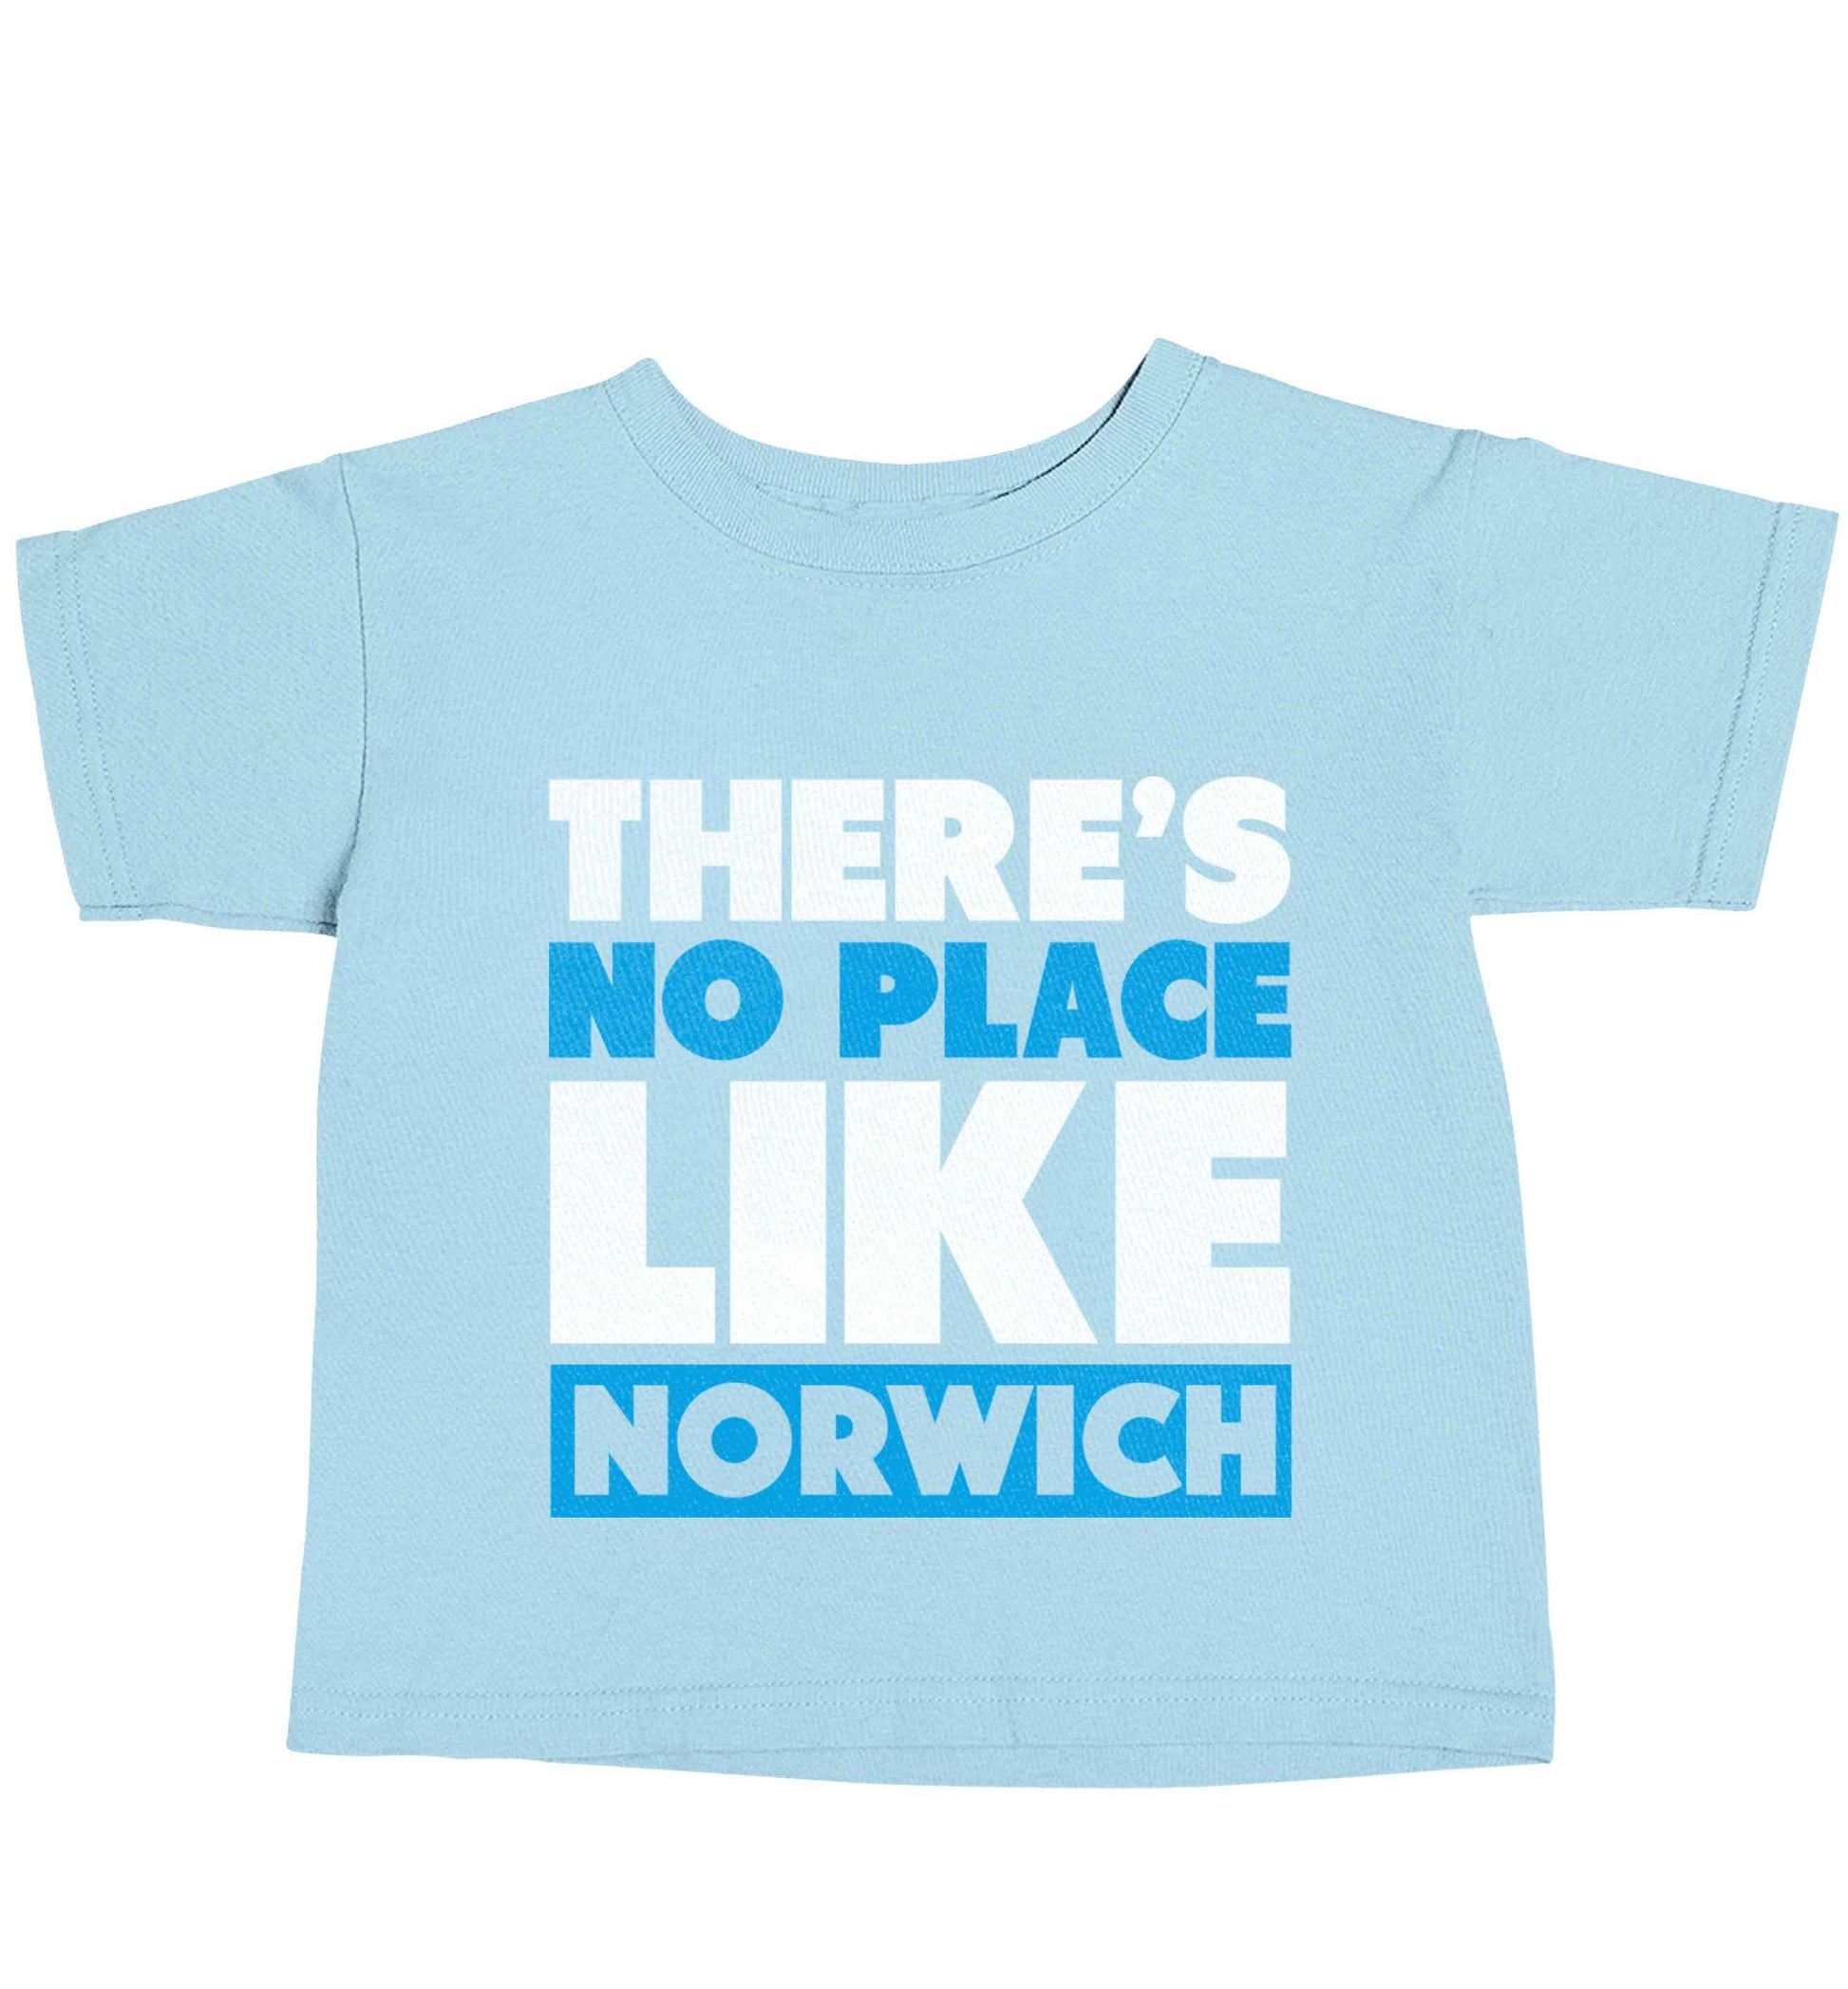 There's no place like Norwich light blue baby toddler Tshirt 2 Years